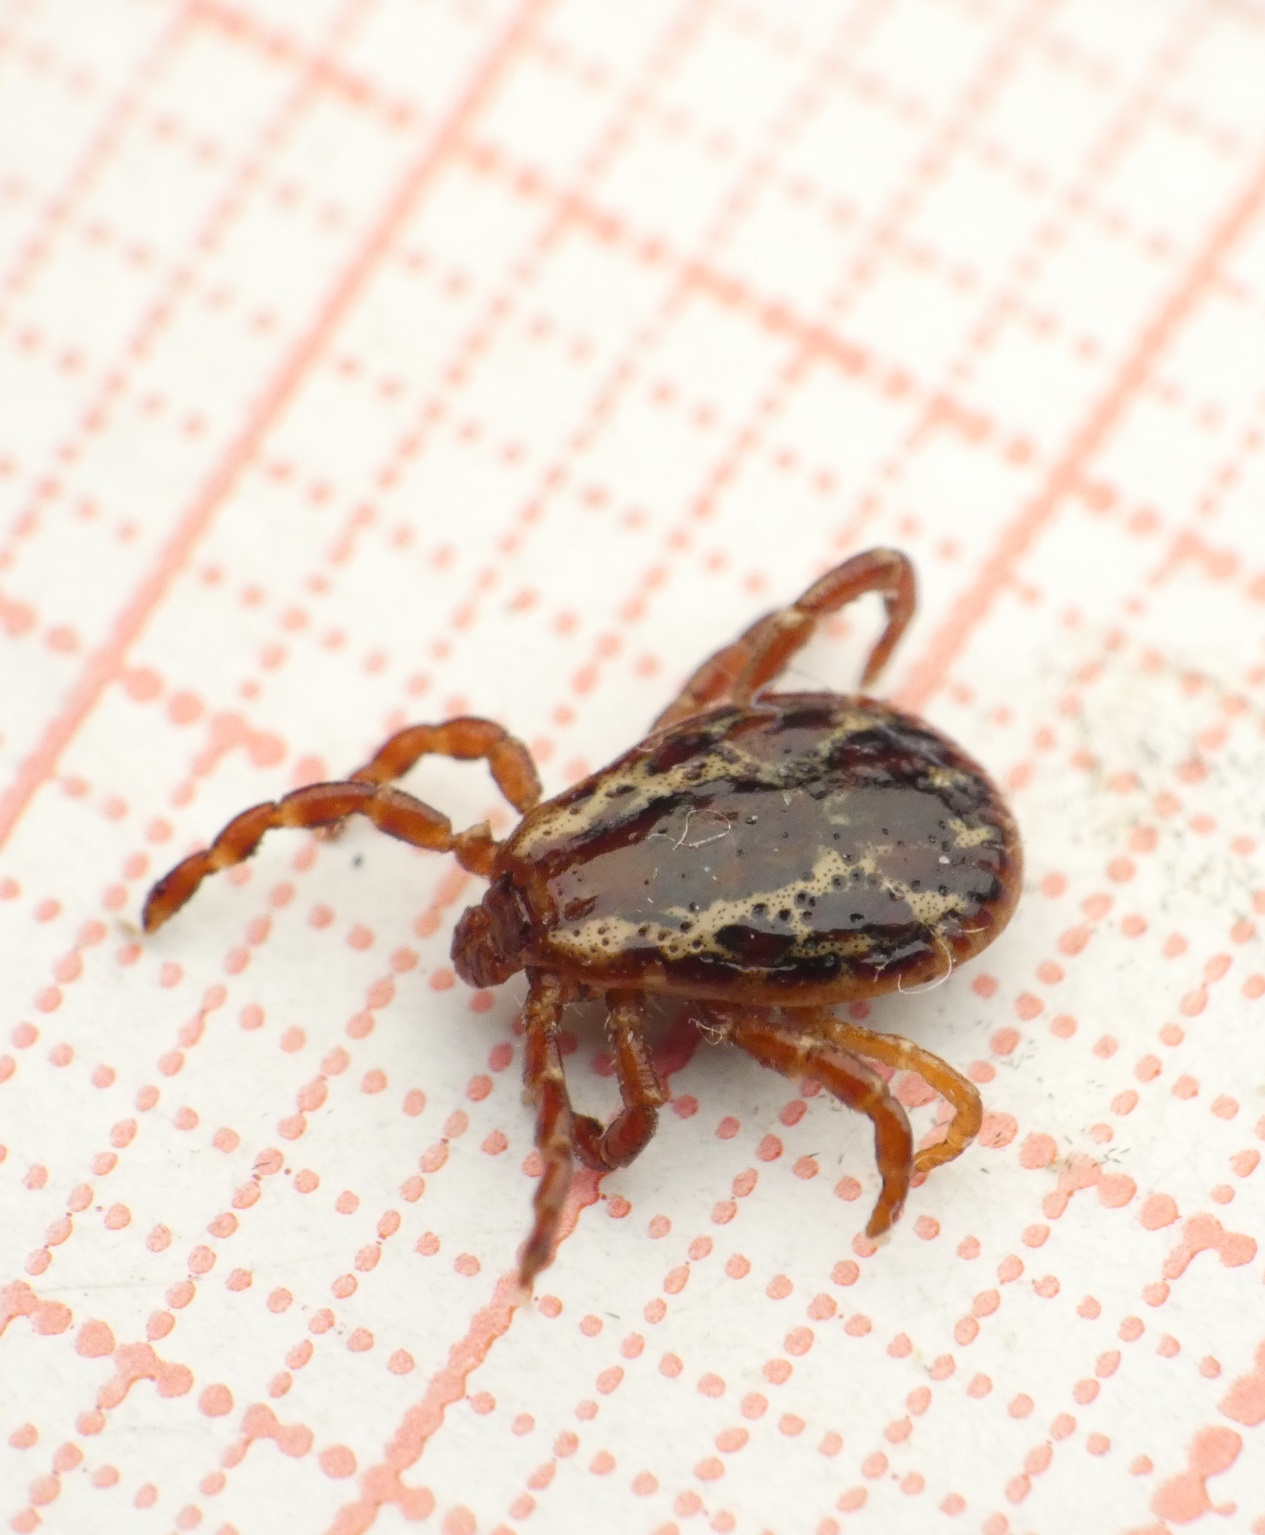 Close-up photo of a wood tick. It is brown and dark-red with tan markings. It has a small head, a glossy back and eight segmented legs